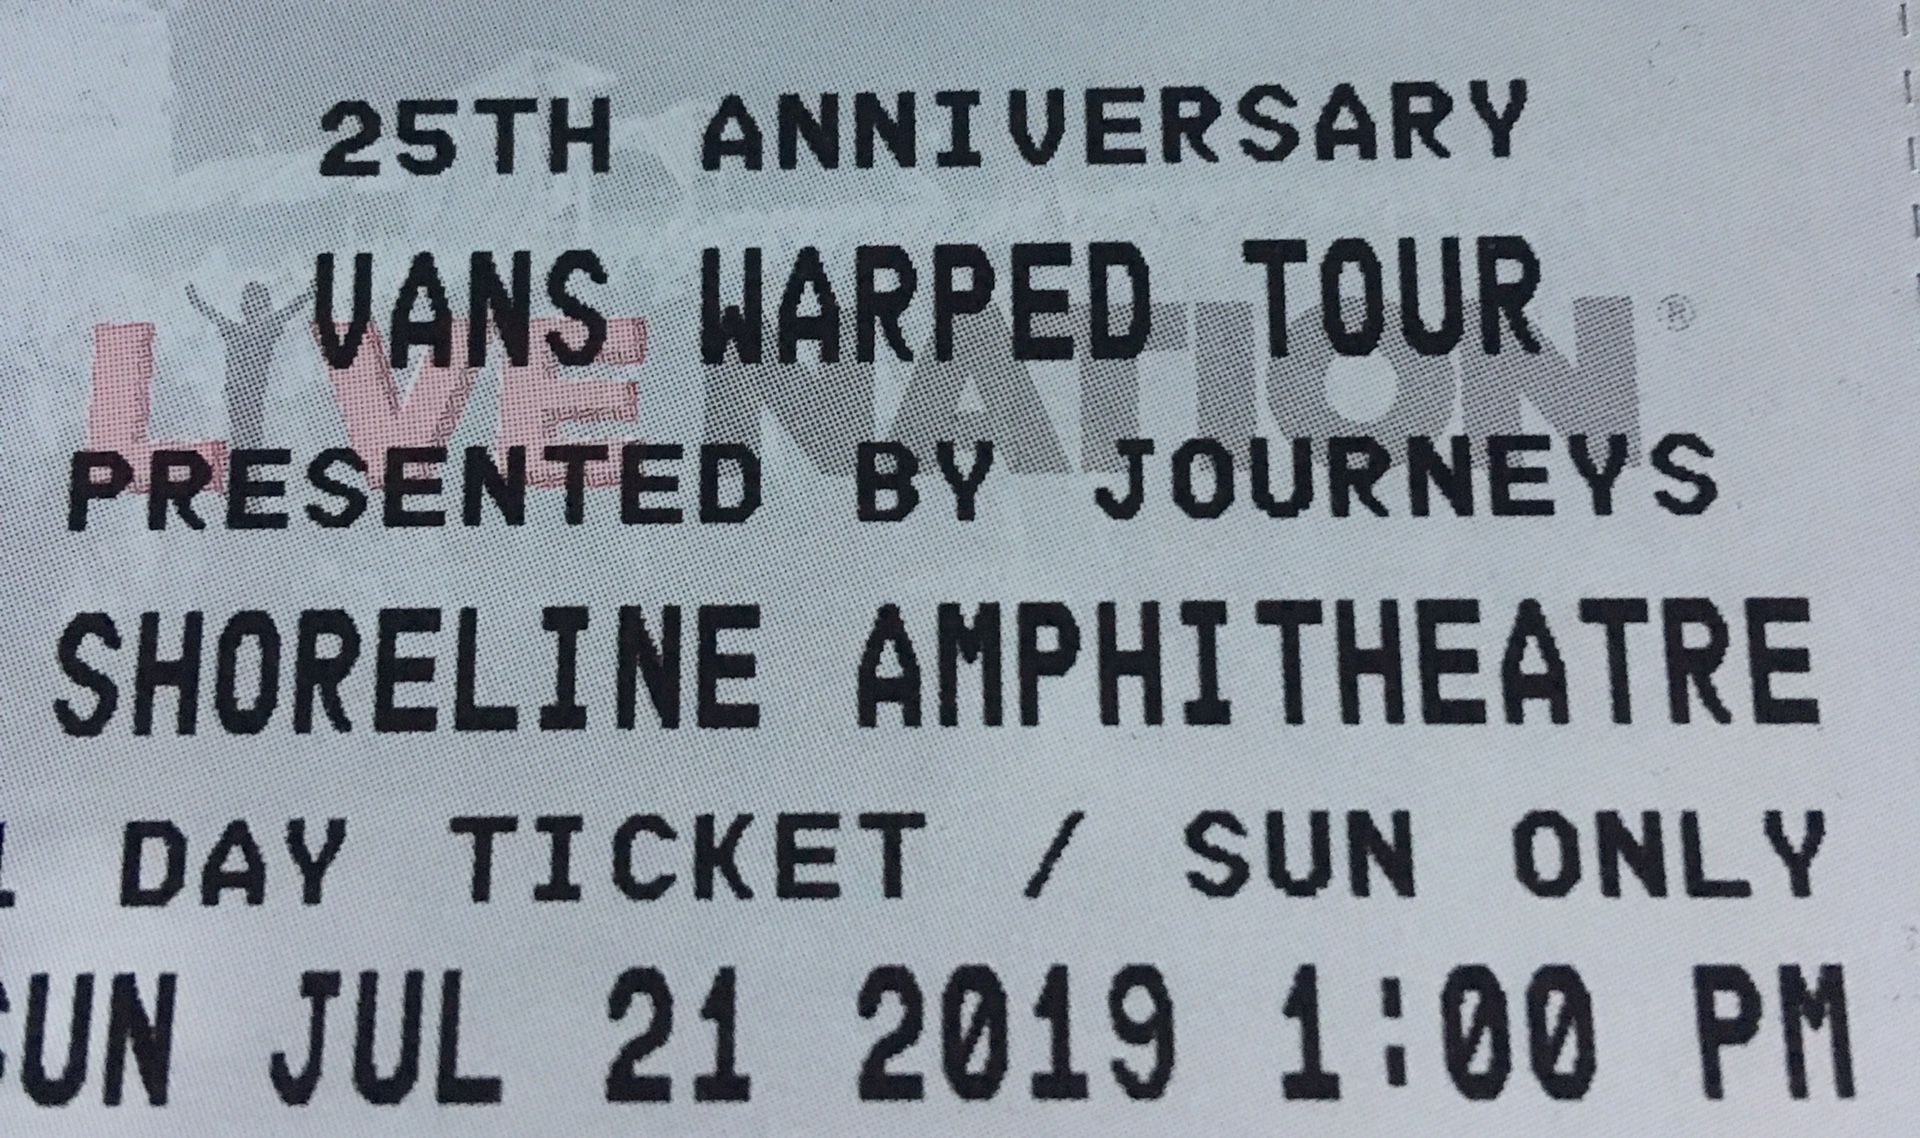 Warped tour tickets- Saturday and Sunday